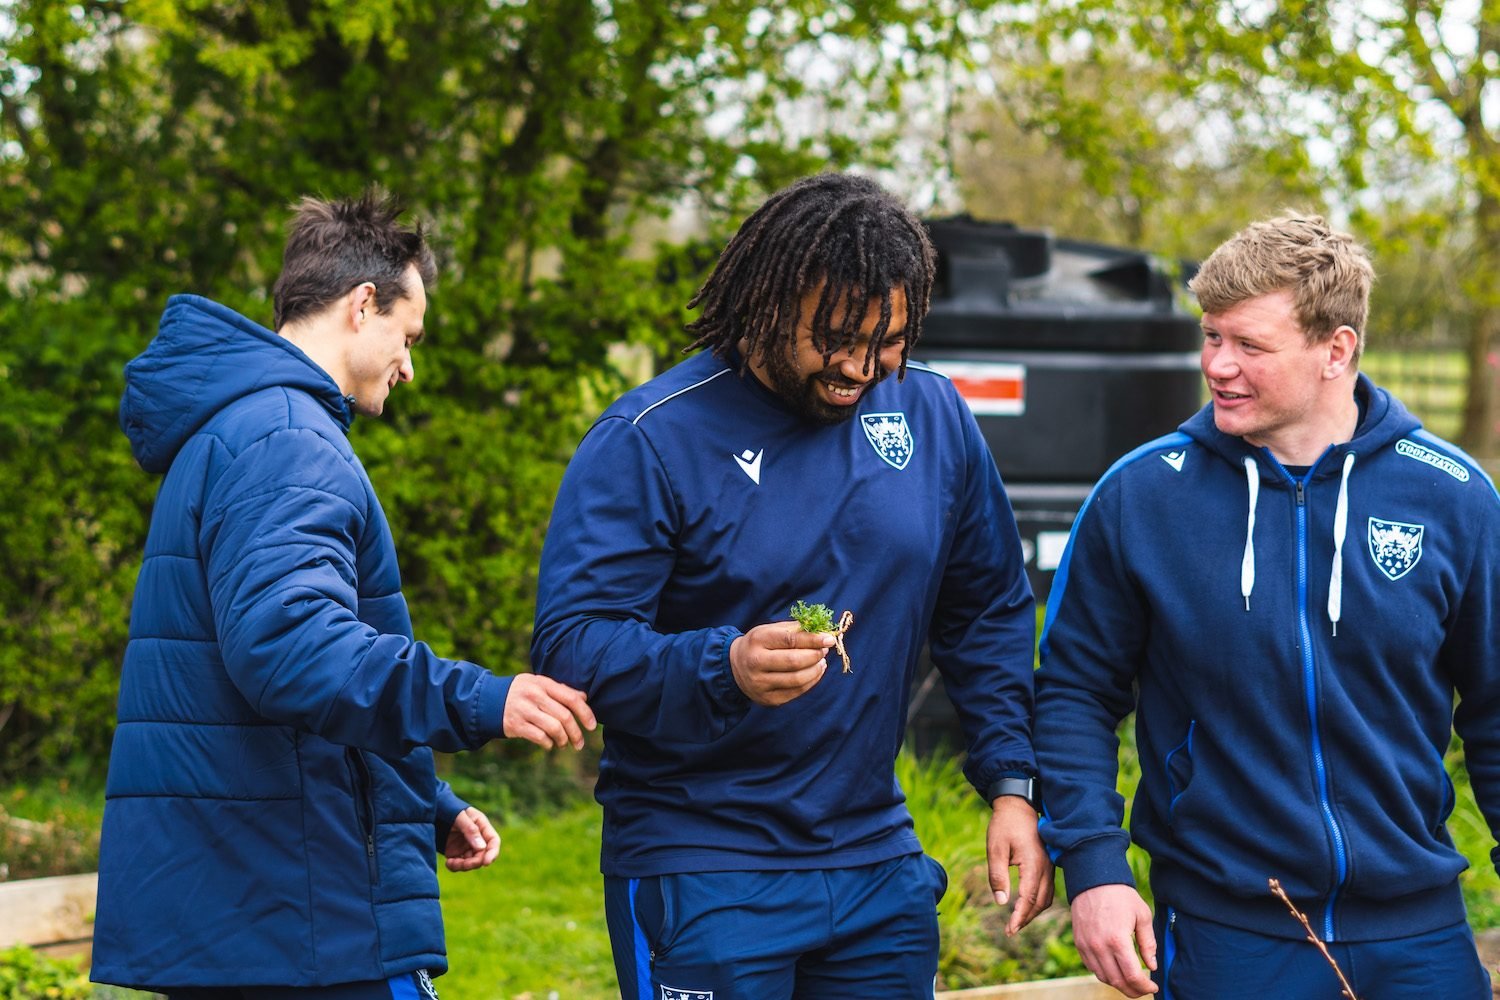 Saints’ players were on hand to help bottling and labelling the limited-edition Gin